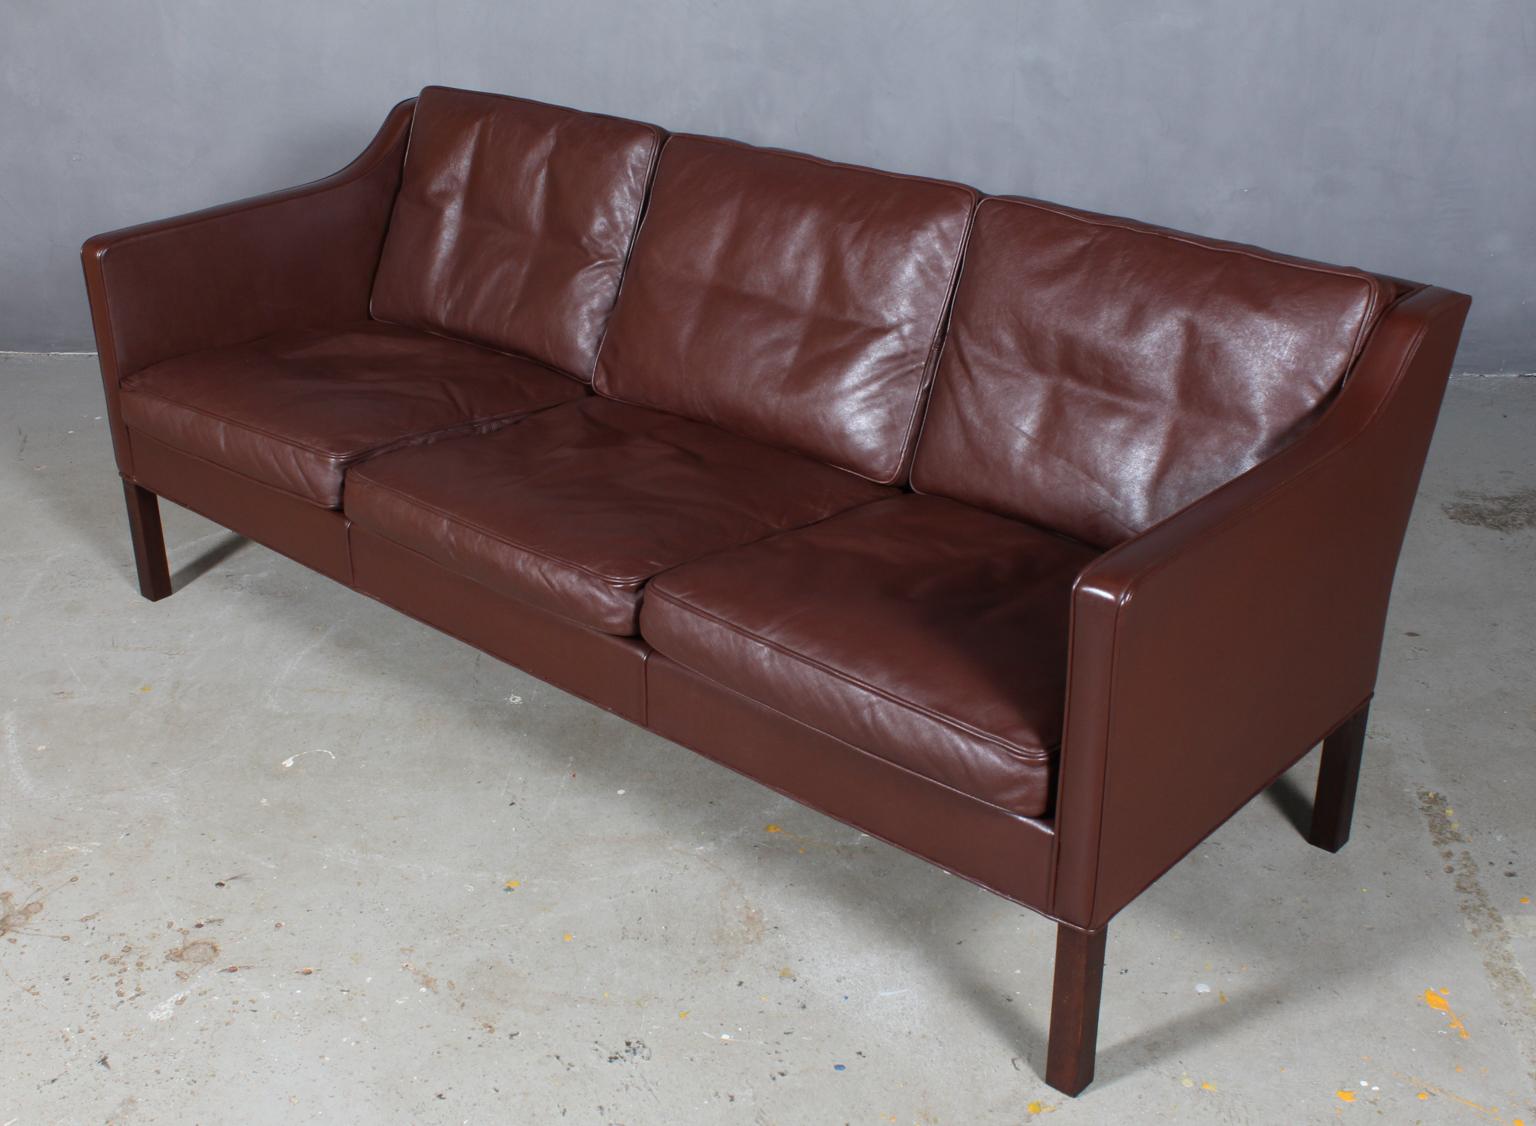 Børge Mogensen three-seat sofa original upholstered in brown leather.

Legs of smoked oak.

Model 2523, made by Fredericia Furniture.